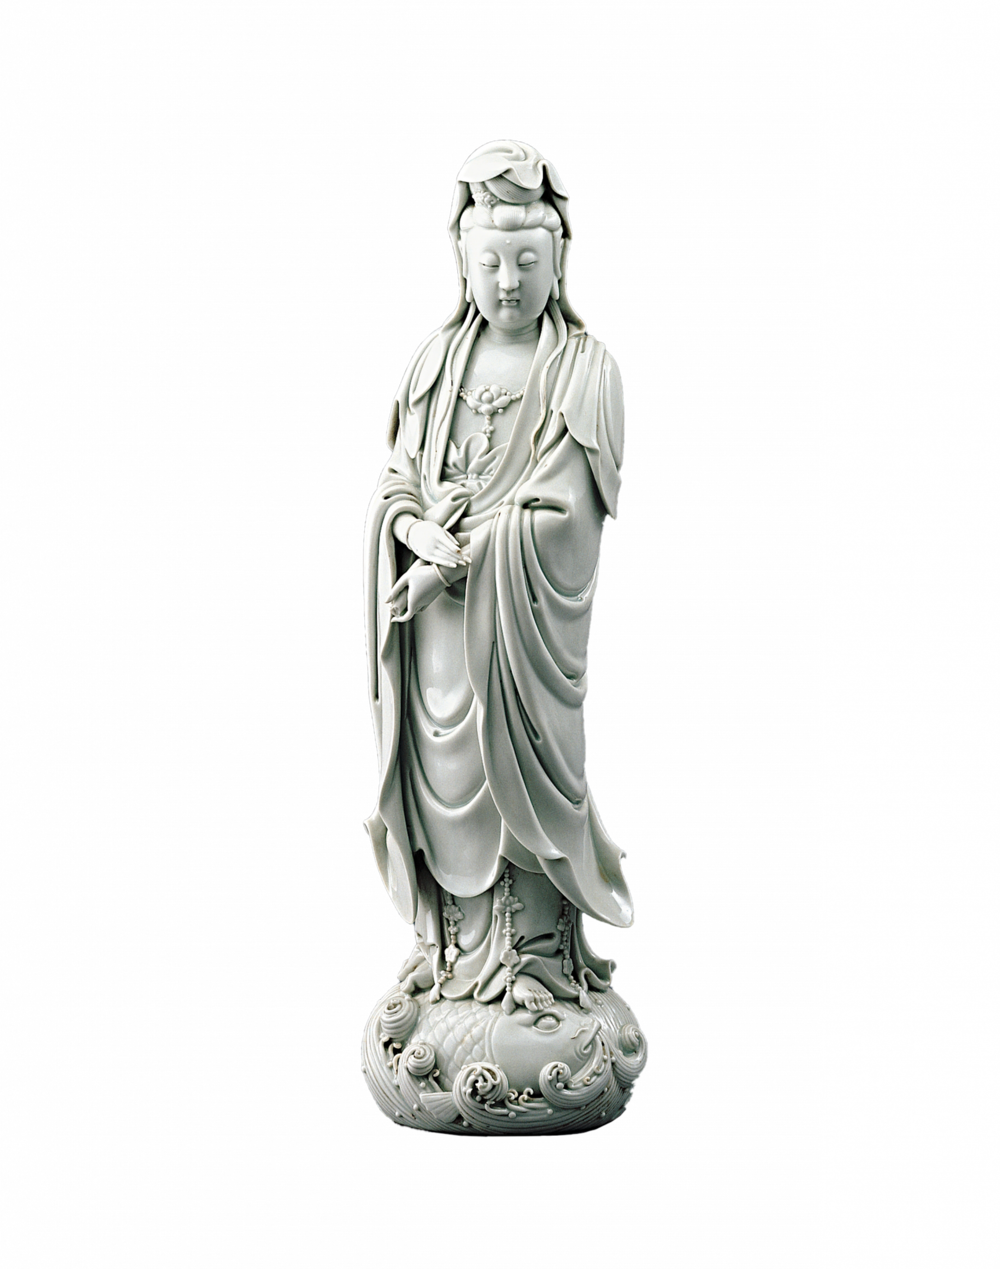 Guanyin, the Bodhisattva of Compassion, as the Patron of fishermen